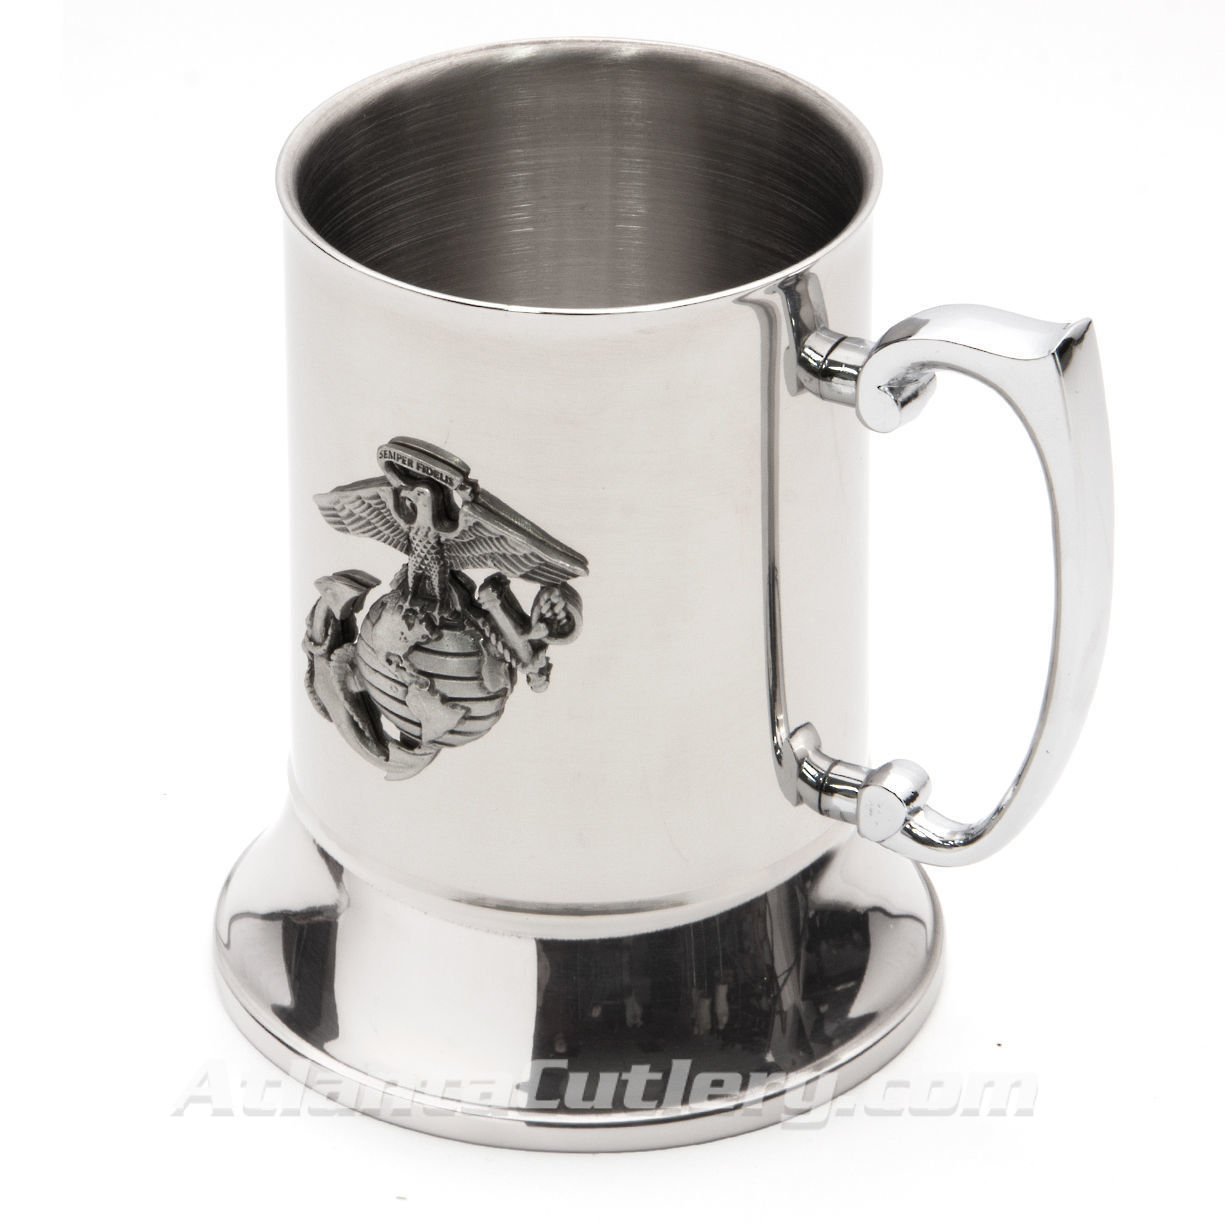 Stainless Steel Marine Corps Mug has Marine Corps emblem prominently and proudly attached on the side, large handle and base